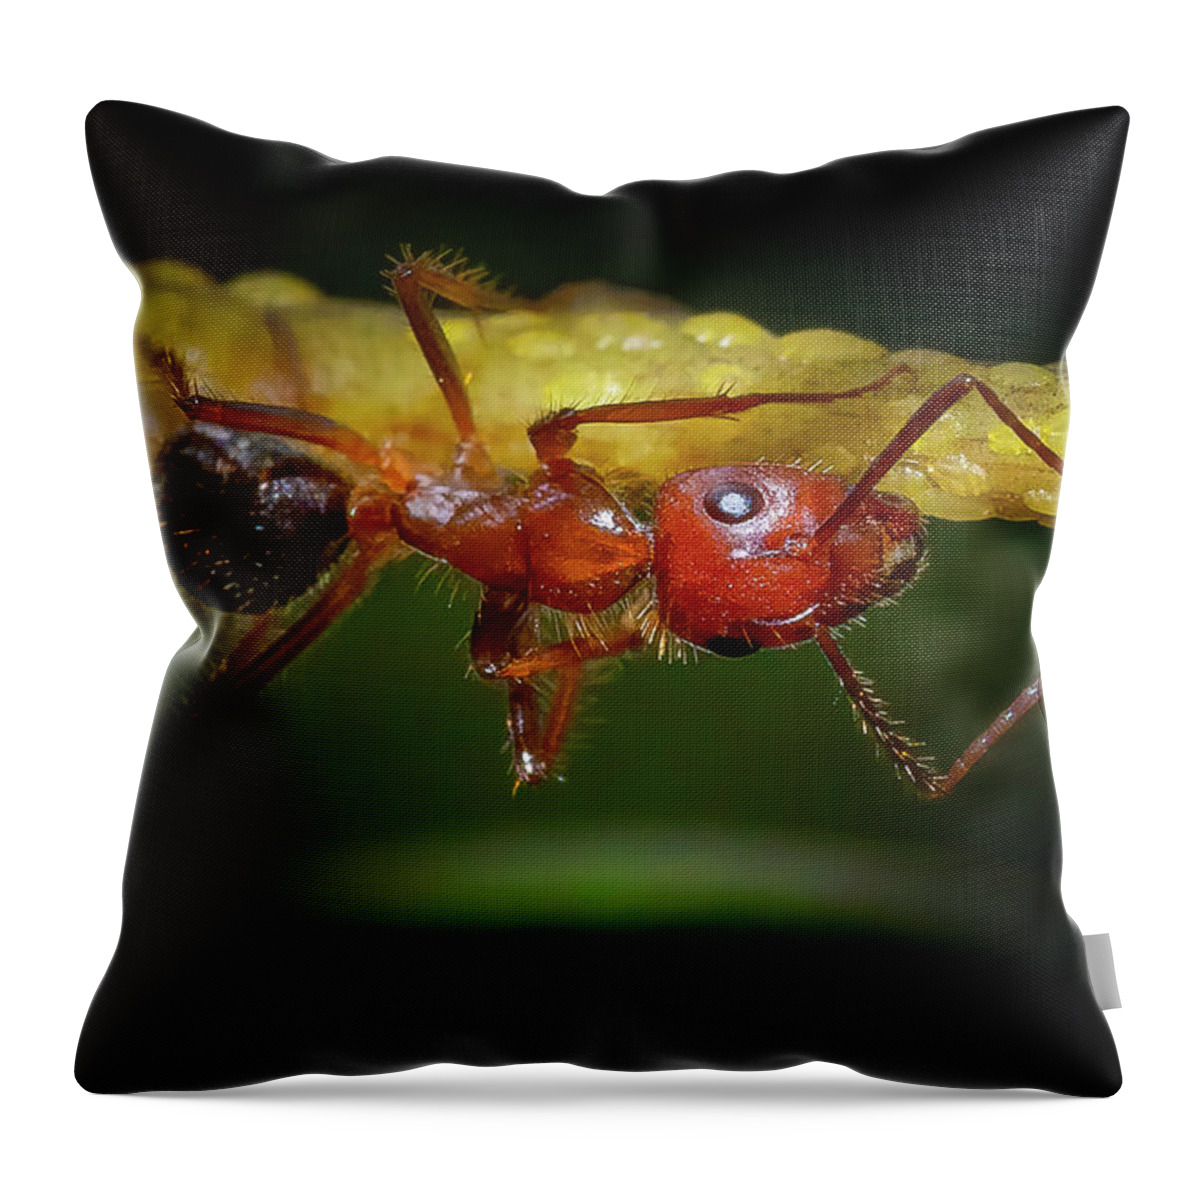 Ants Throw Pillow featuring the photograph Carpenter Ant at Work by Mark Andrew Thomas